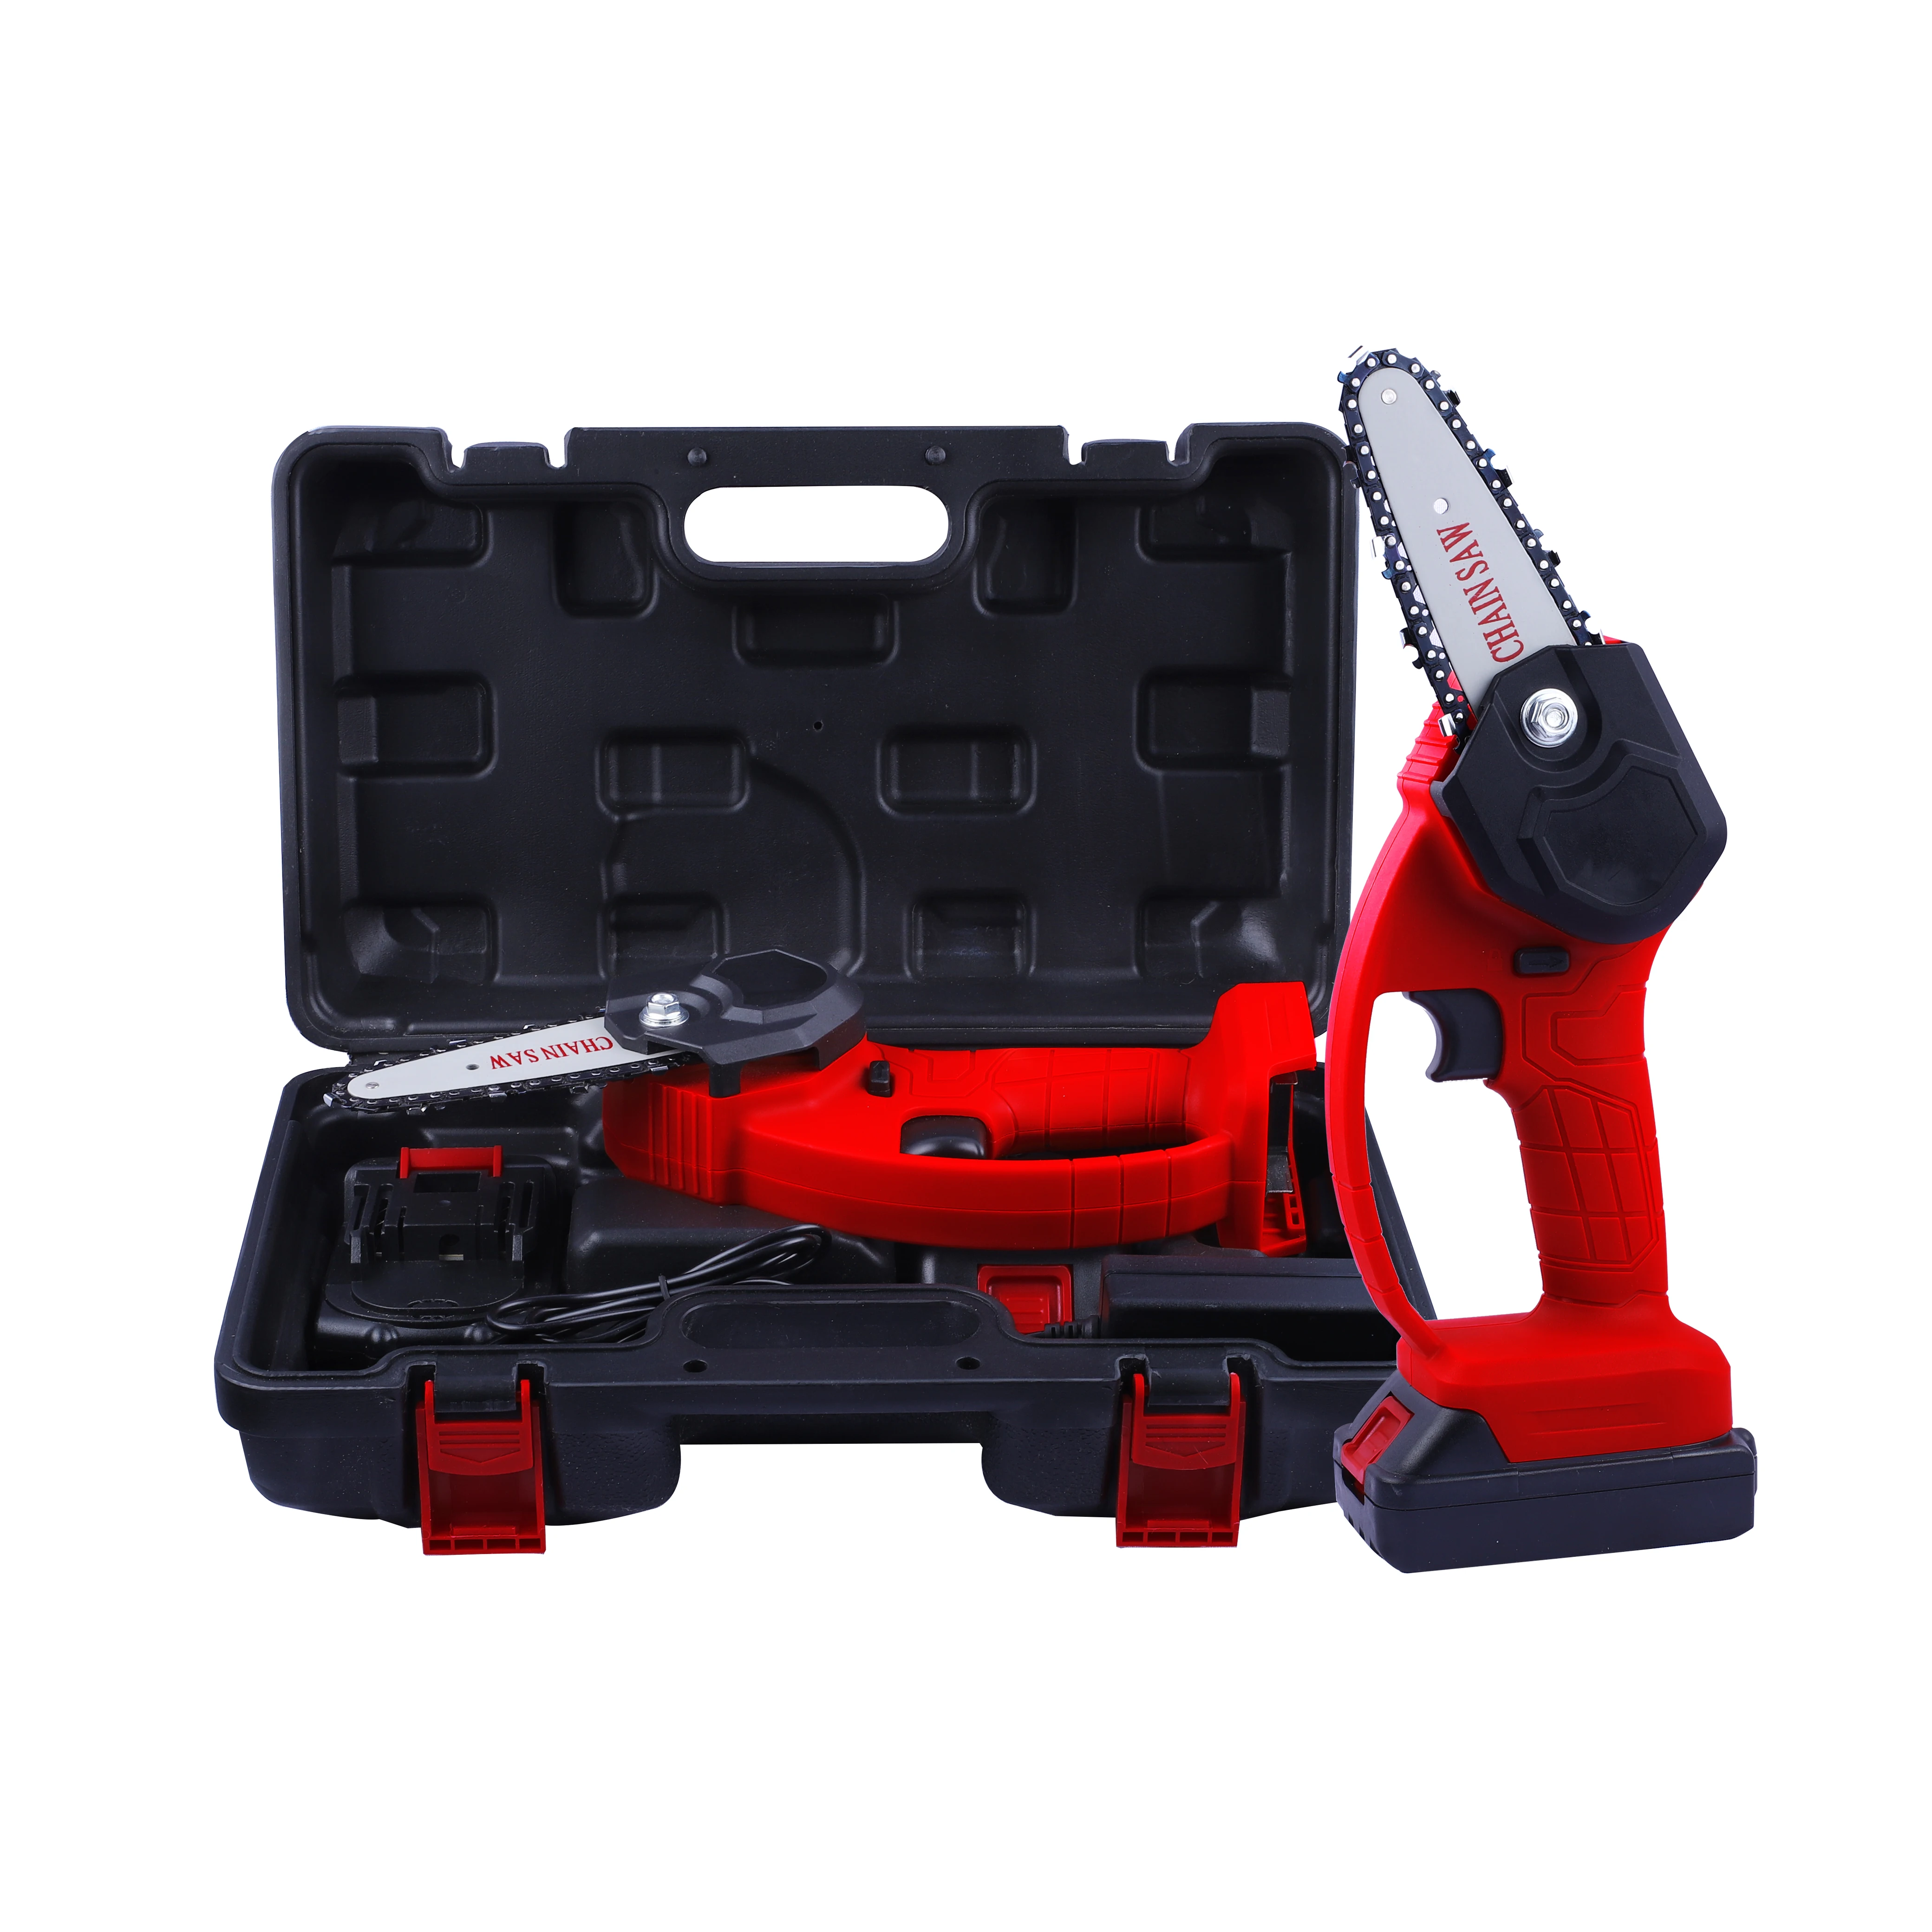 4 Inch Cordless Electric Portable Chainsaw with Brushless Motor Pruning Shears Small Chainsaws for Sale exquisite and reliable air filter kit for echo chainsaws cs590 cs600p cs620p with corrosion resistant material